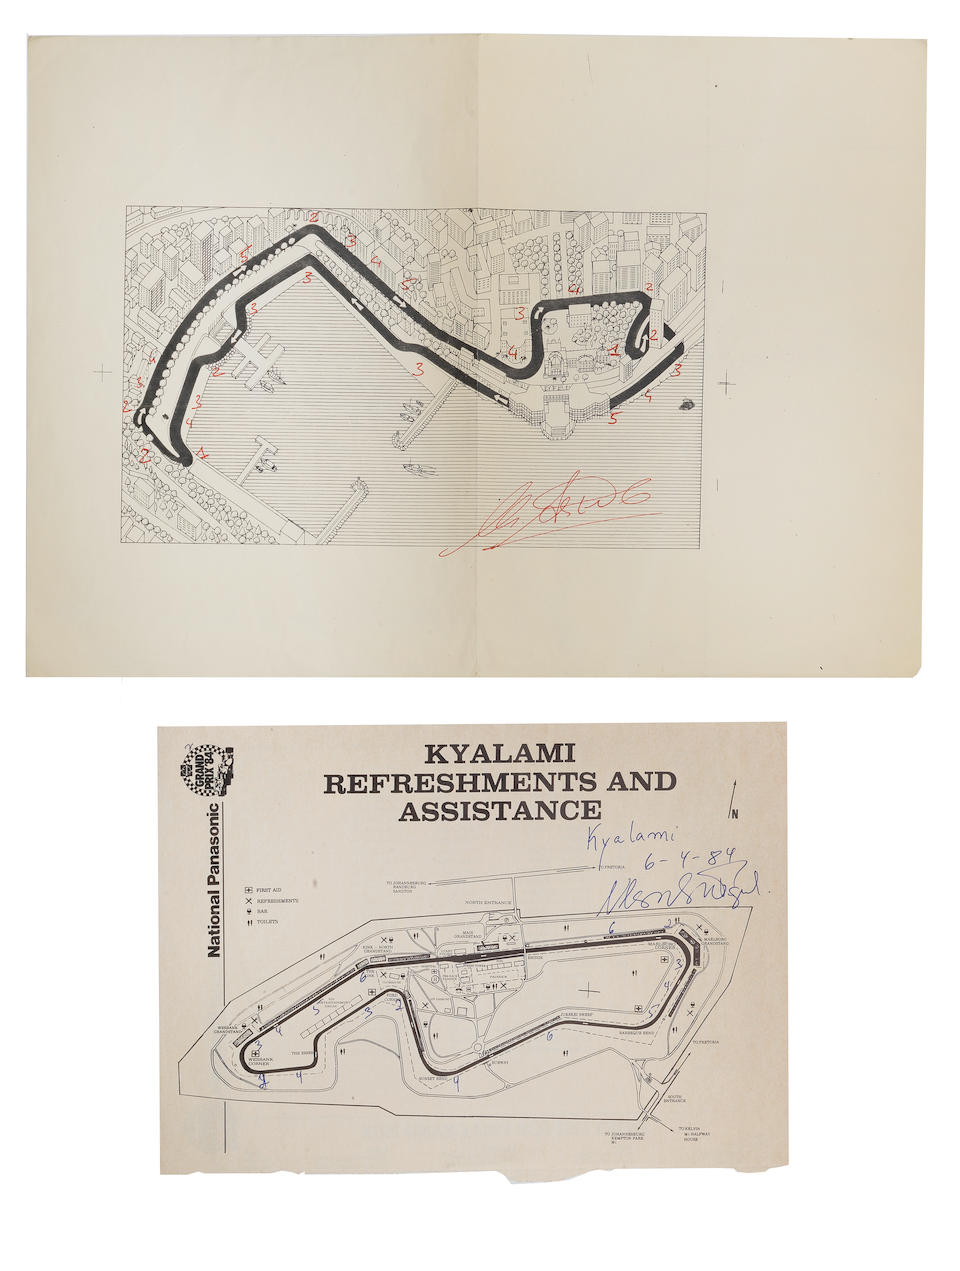 Circuit Maps signed by Michele Alboreto and Nelson Piquet,